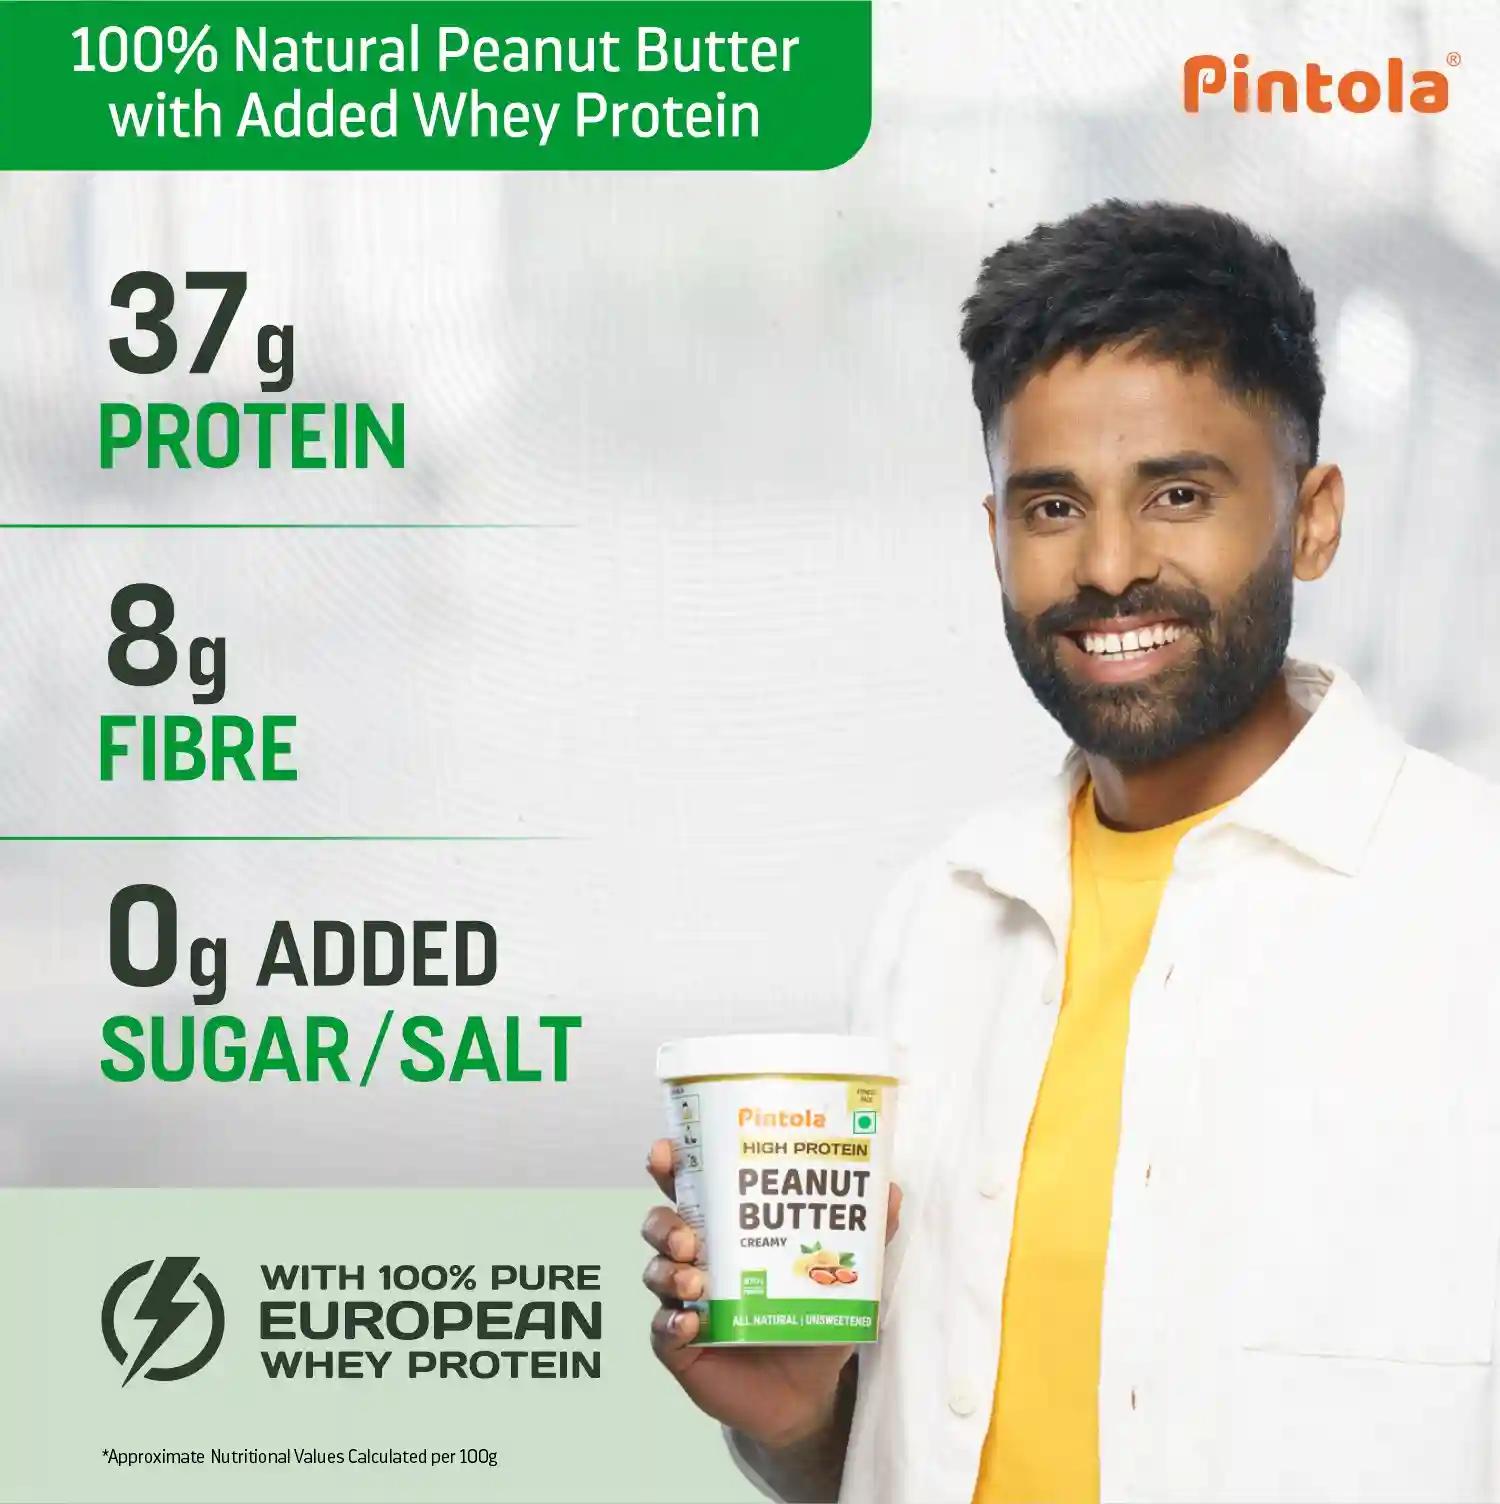 Pintola High Protein All Natural Peanut Butter Creamy 510g